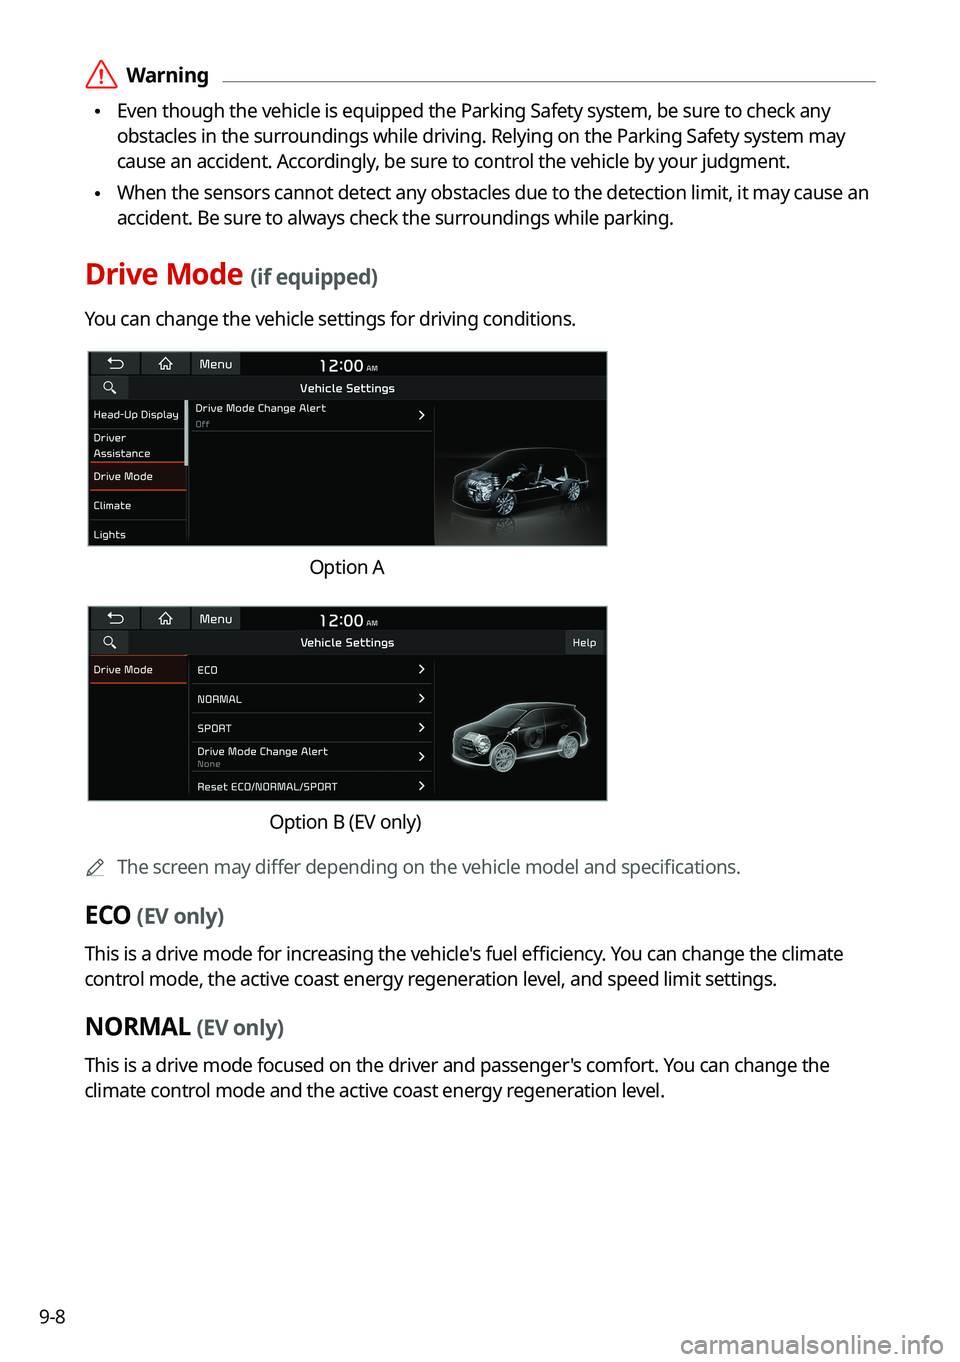 KIA SOUL 2022  Navigation System Quick Reference Guide 9-8
 \335Warning
 \225Even though the vehicle is equipped the Parking Safety system, be sure to check any 
obstacles in the surroundings while driving. Relying on the Parking Safety system may 
cause 